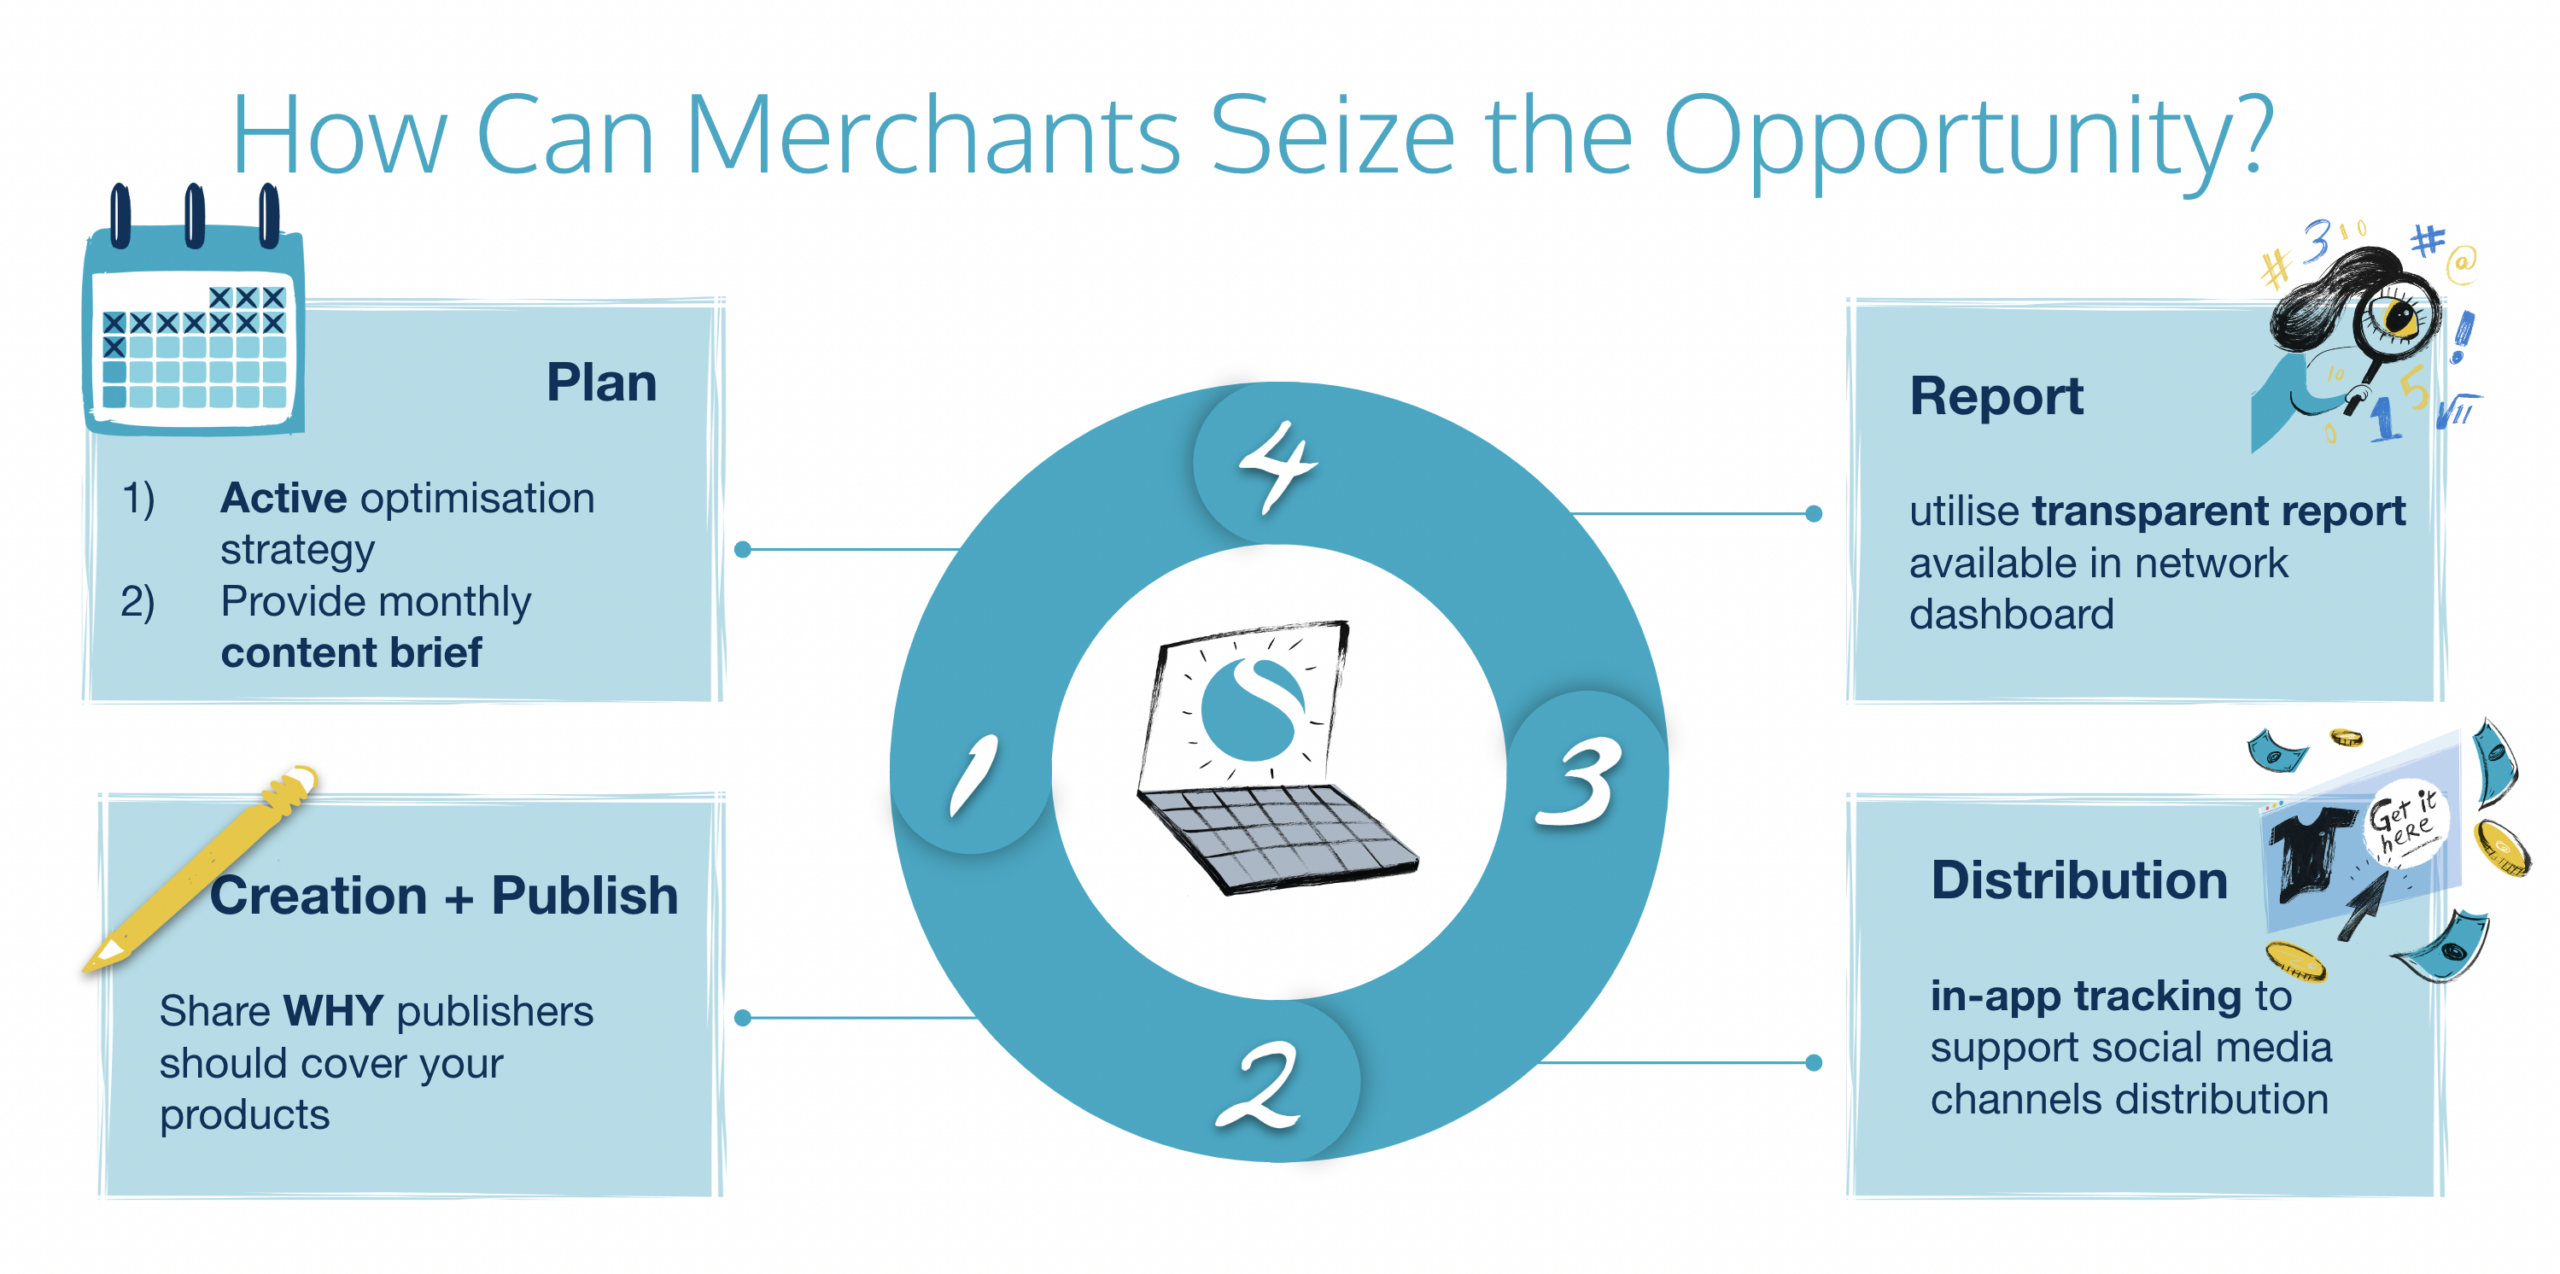 How Can Merchants Seize the Opportunity?